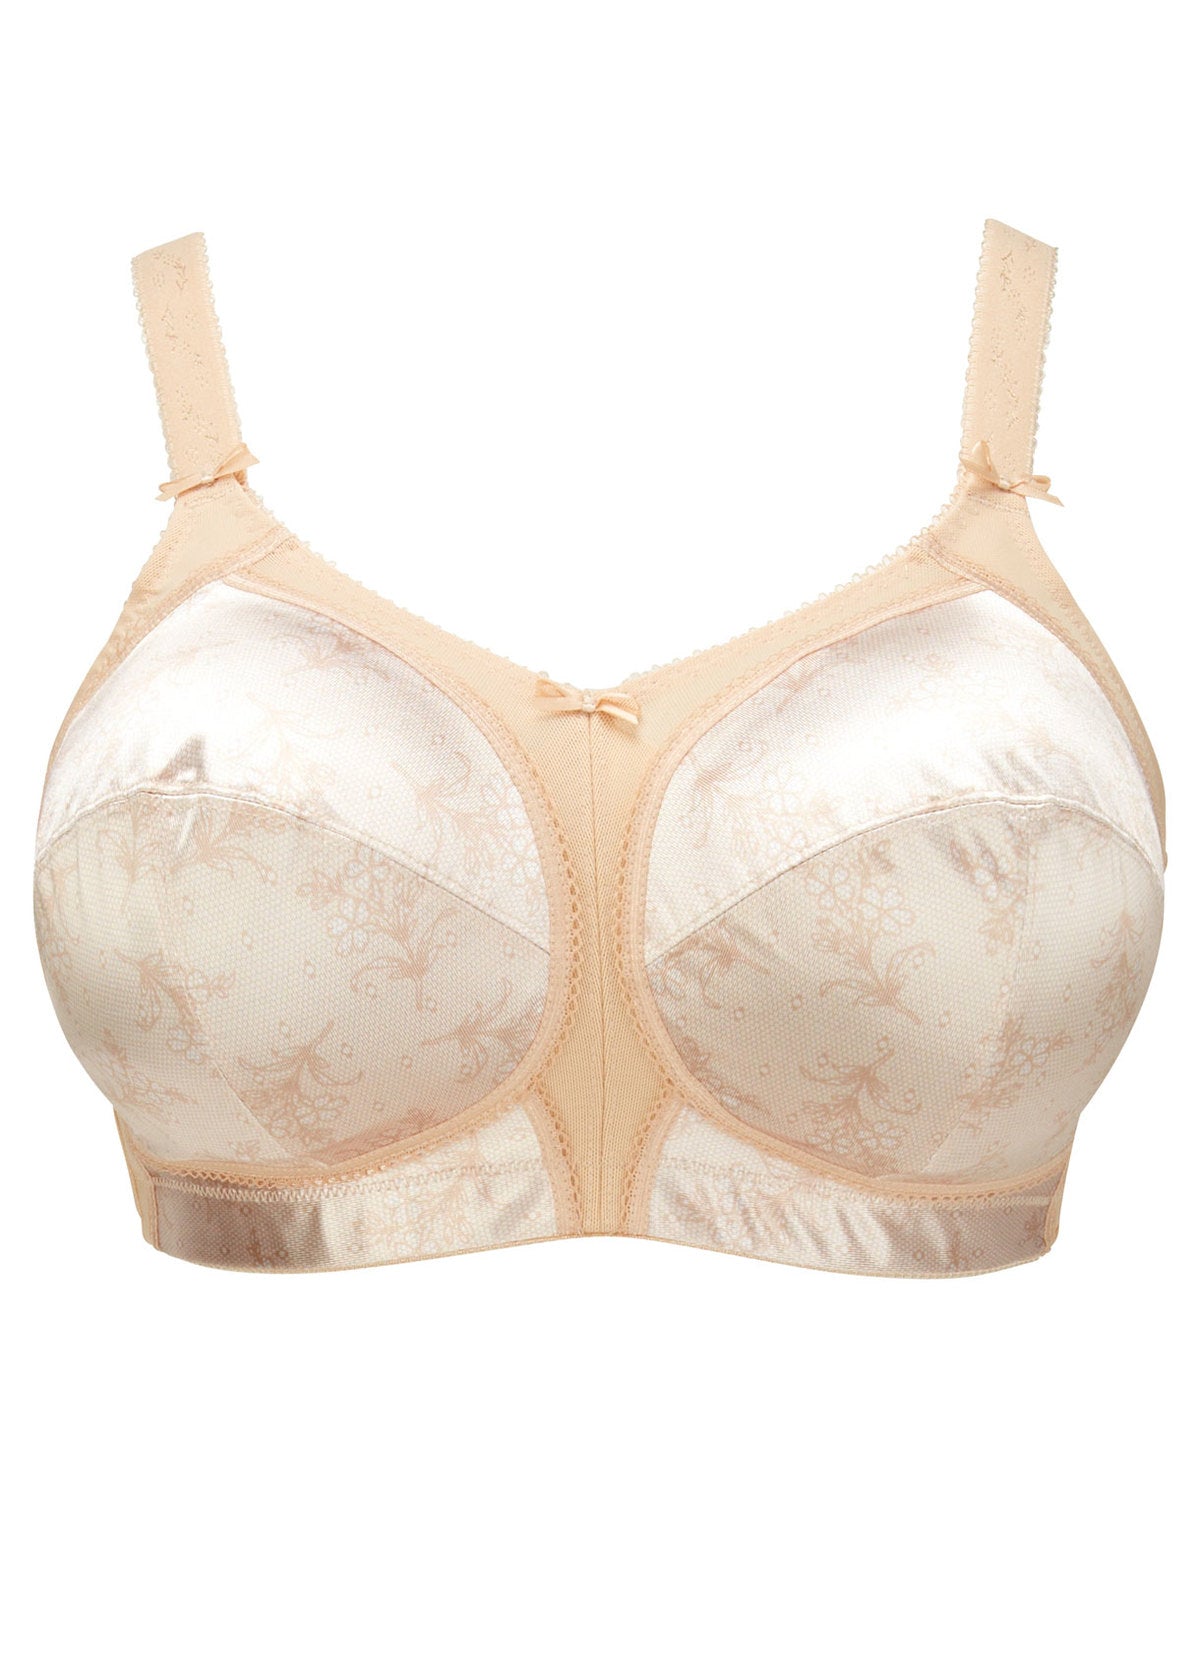 Buy DD-GG Late Nude Recycled Lace Comfort Full Cup Bra 42F, Bras